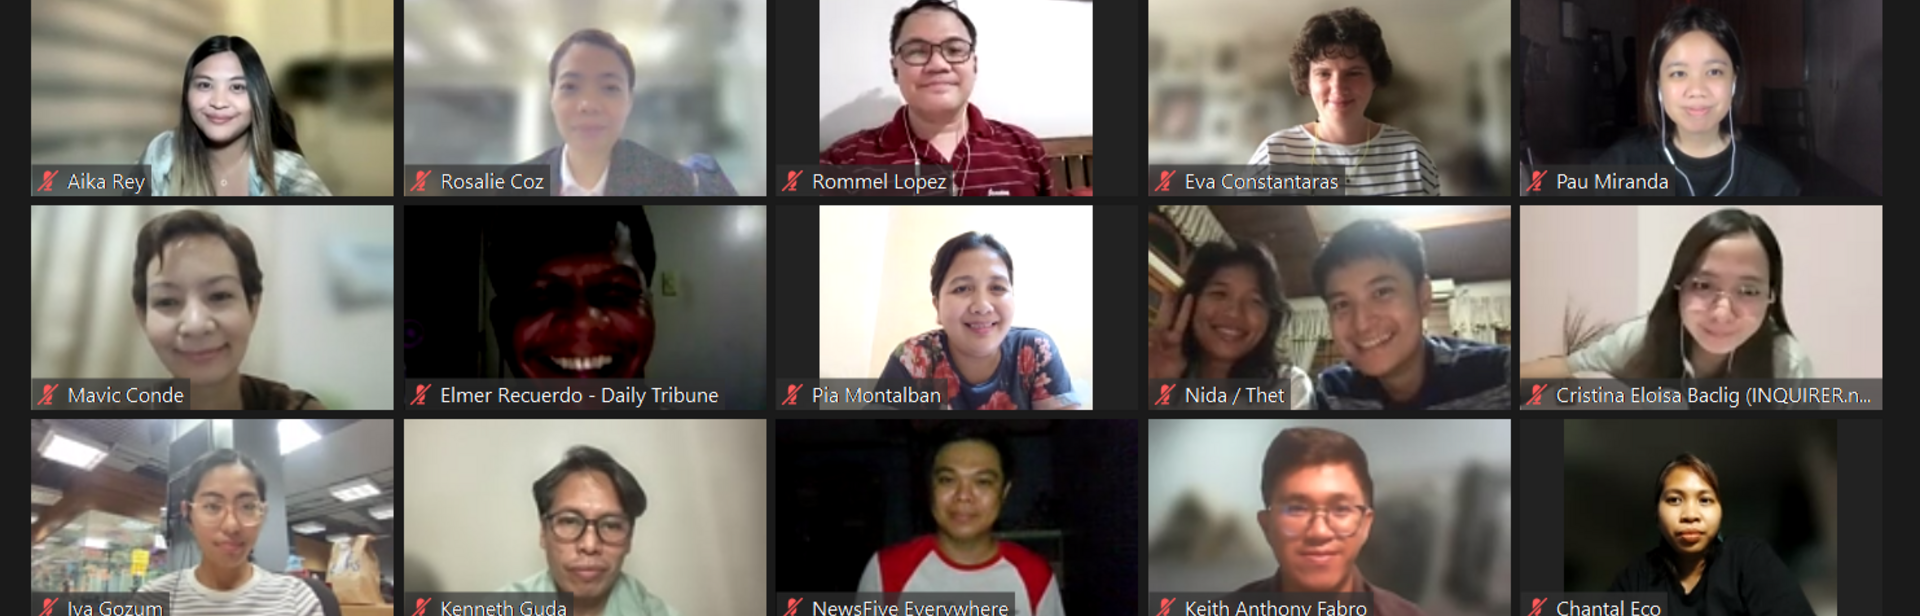 Attendees of an environmental data journalism academy get together on a video call